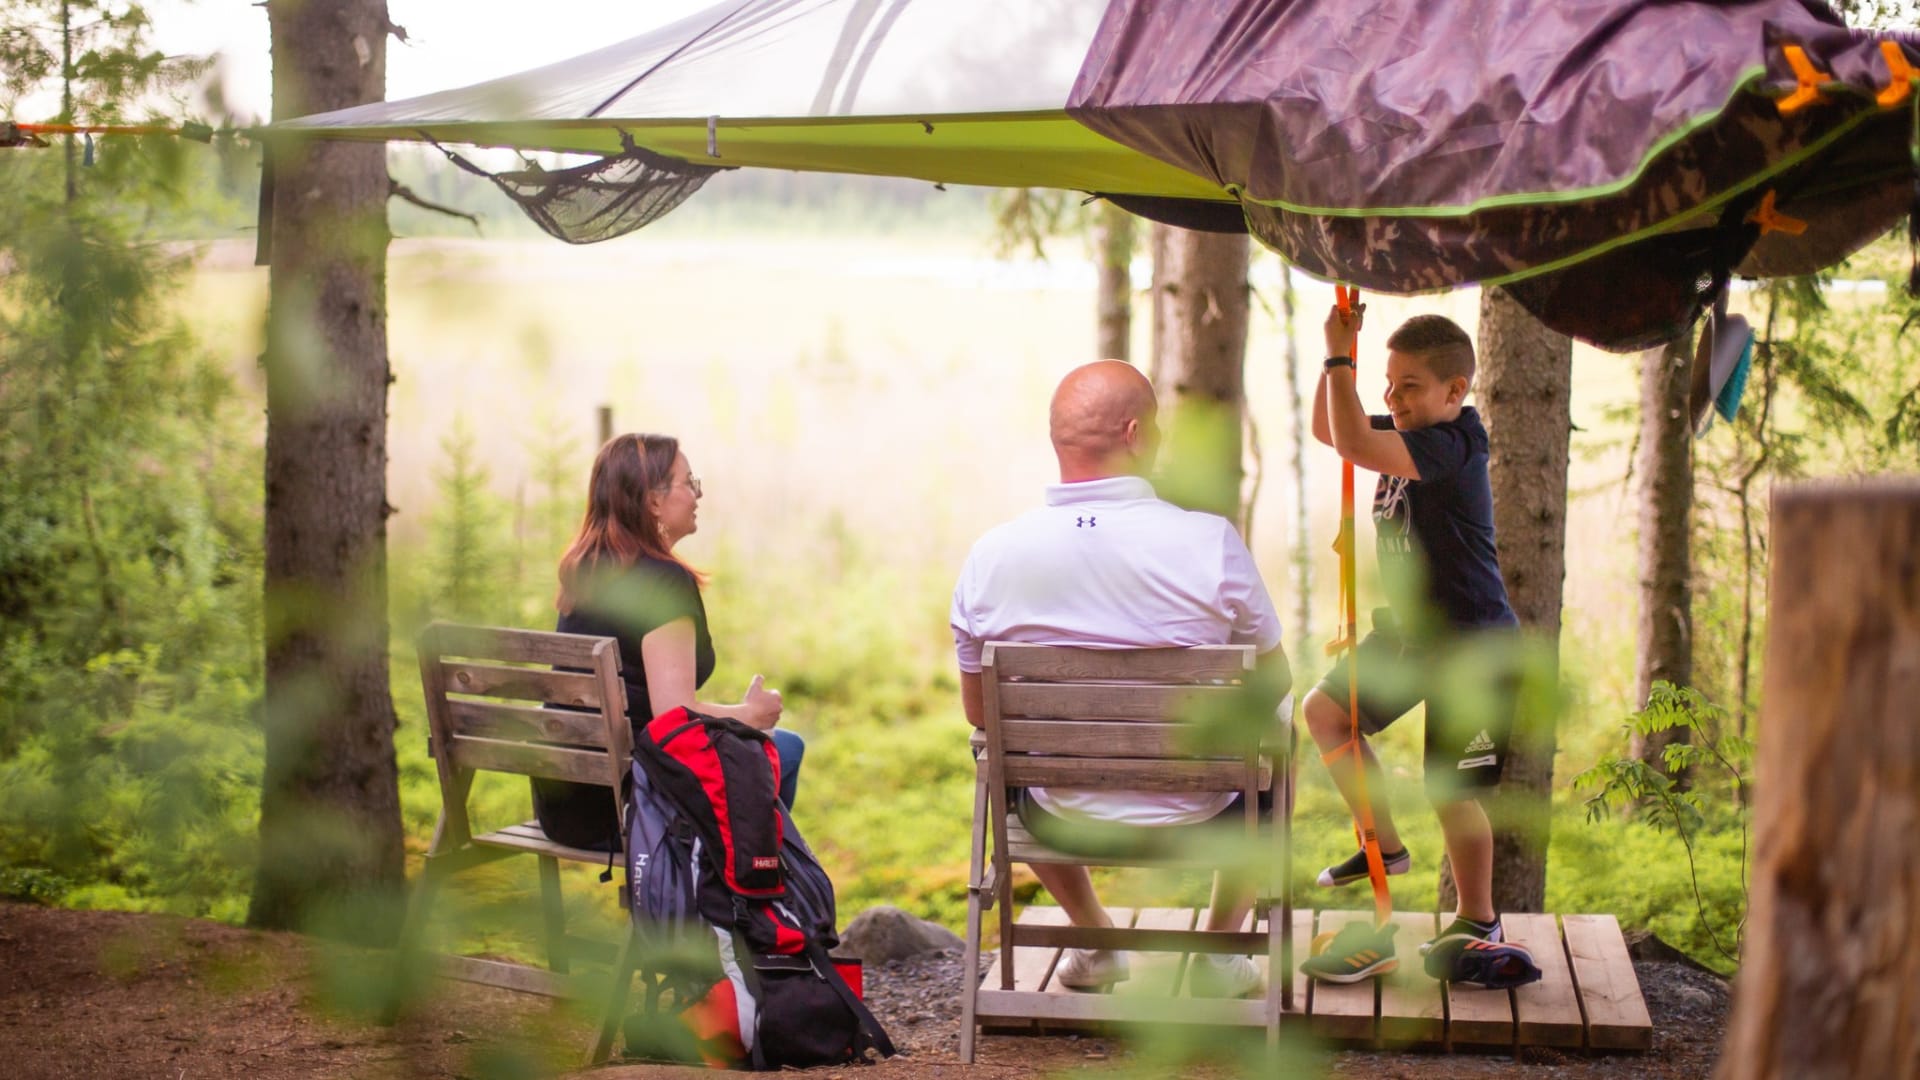 The higher-set tree tent is at a great spot to have the view to the bird lake Hanhijärvi